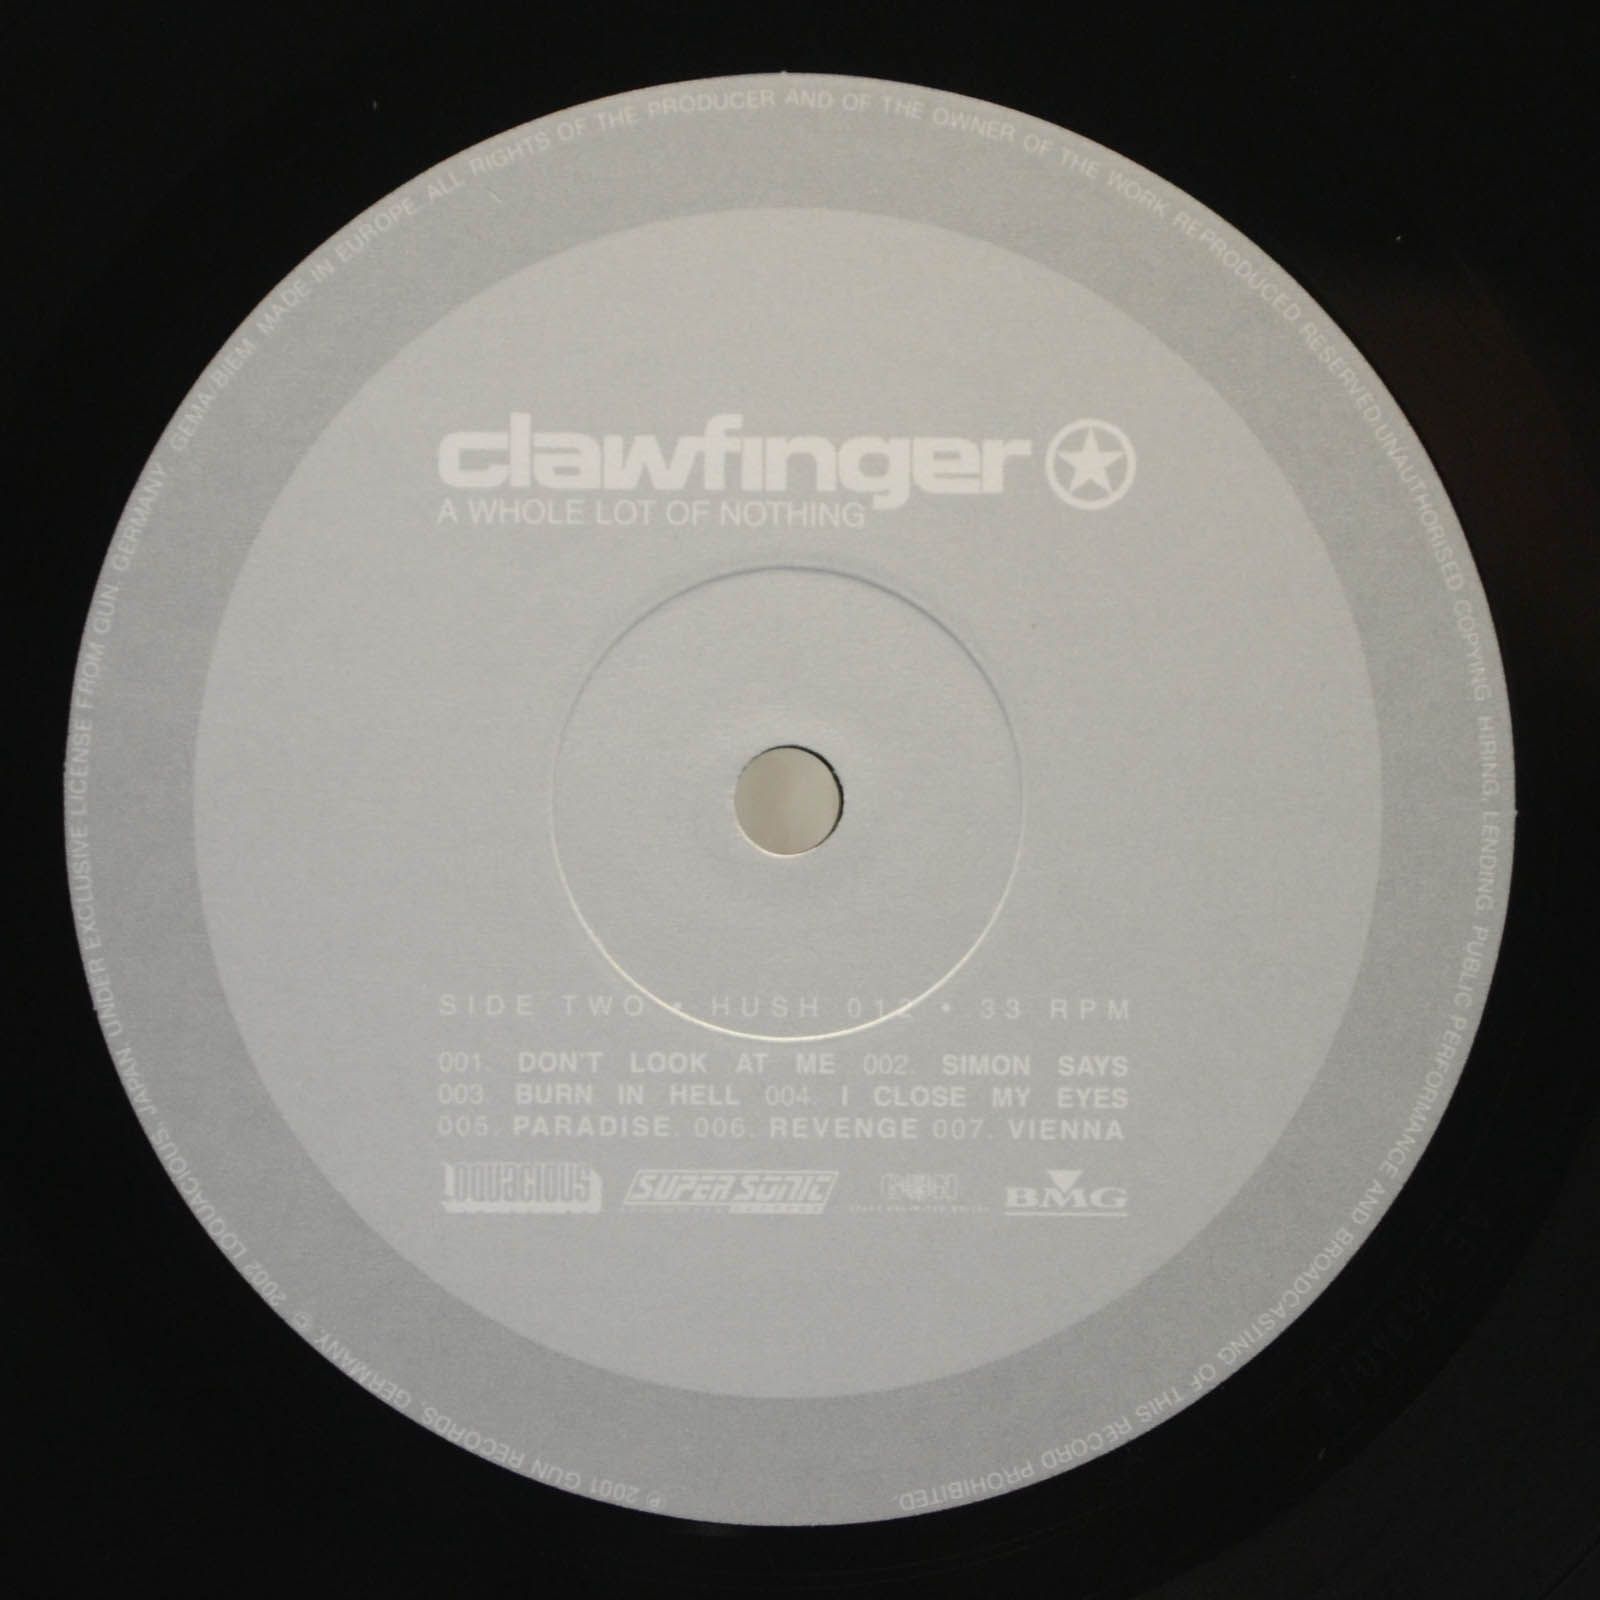 Clawfinger — A Whole Lot Of Nothing, 2001